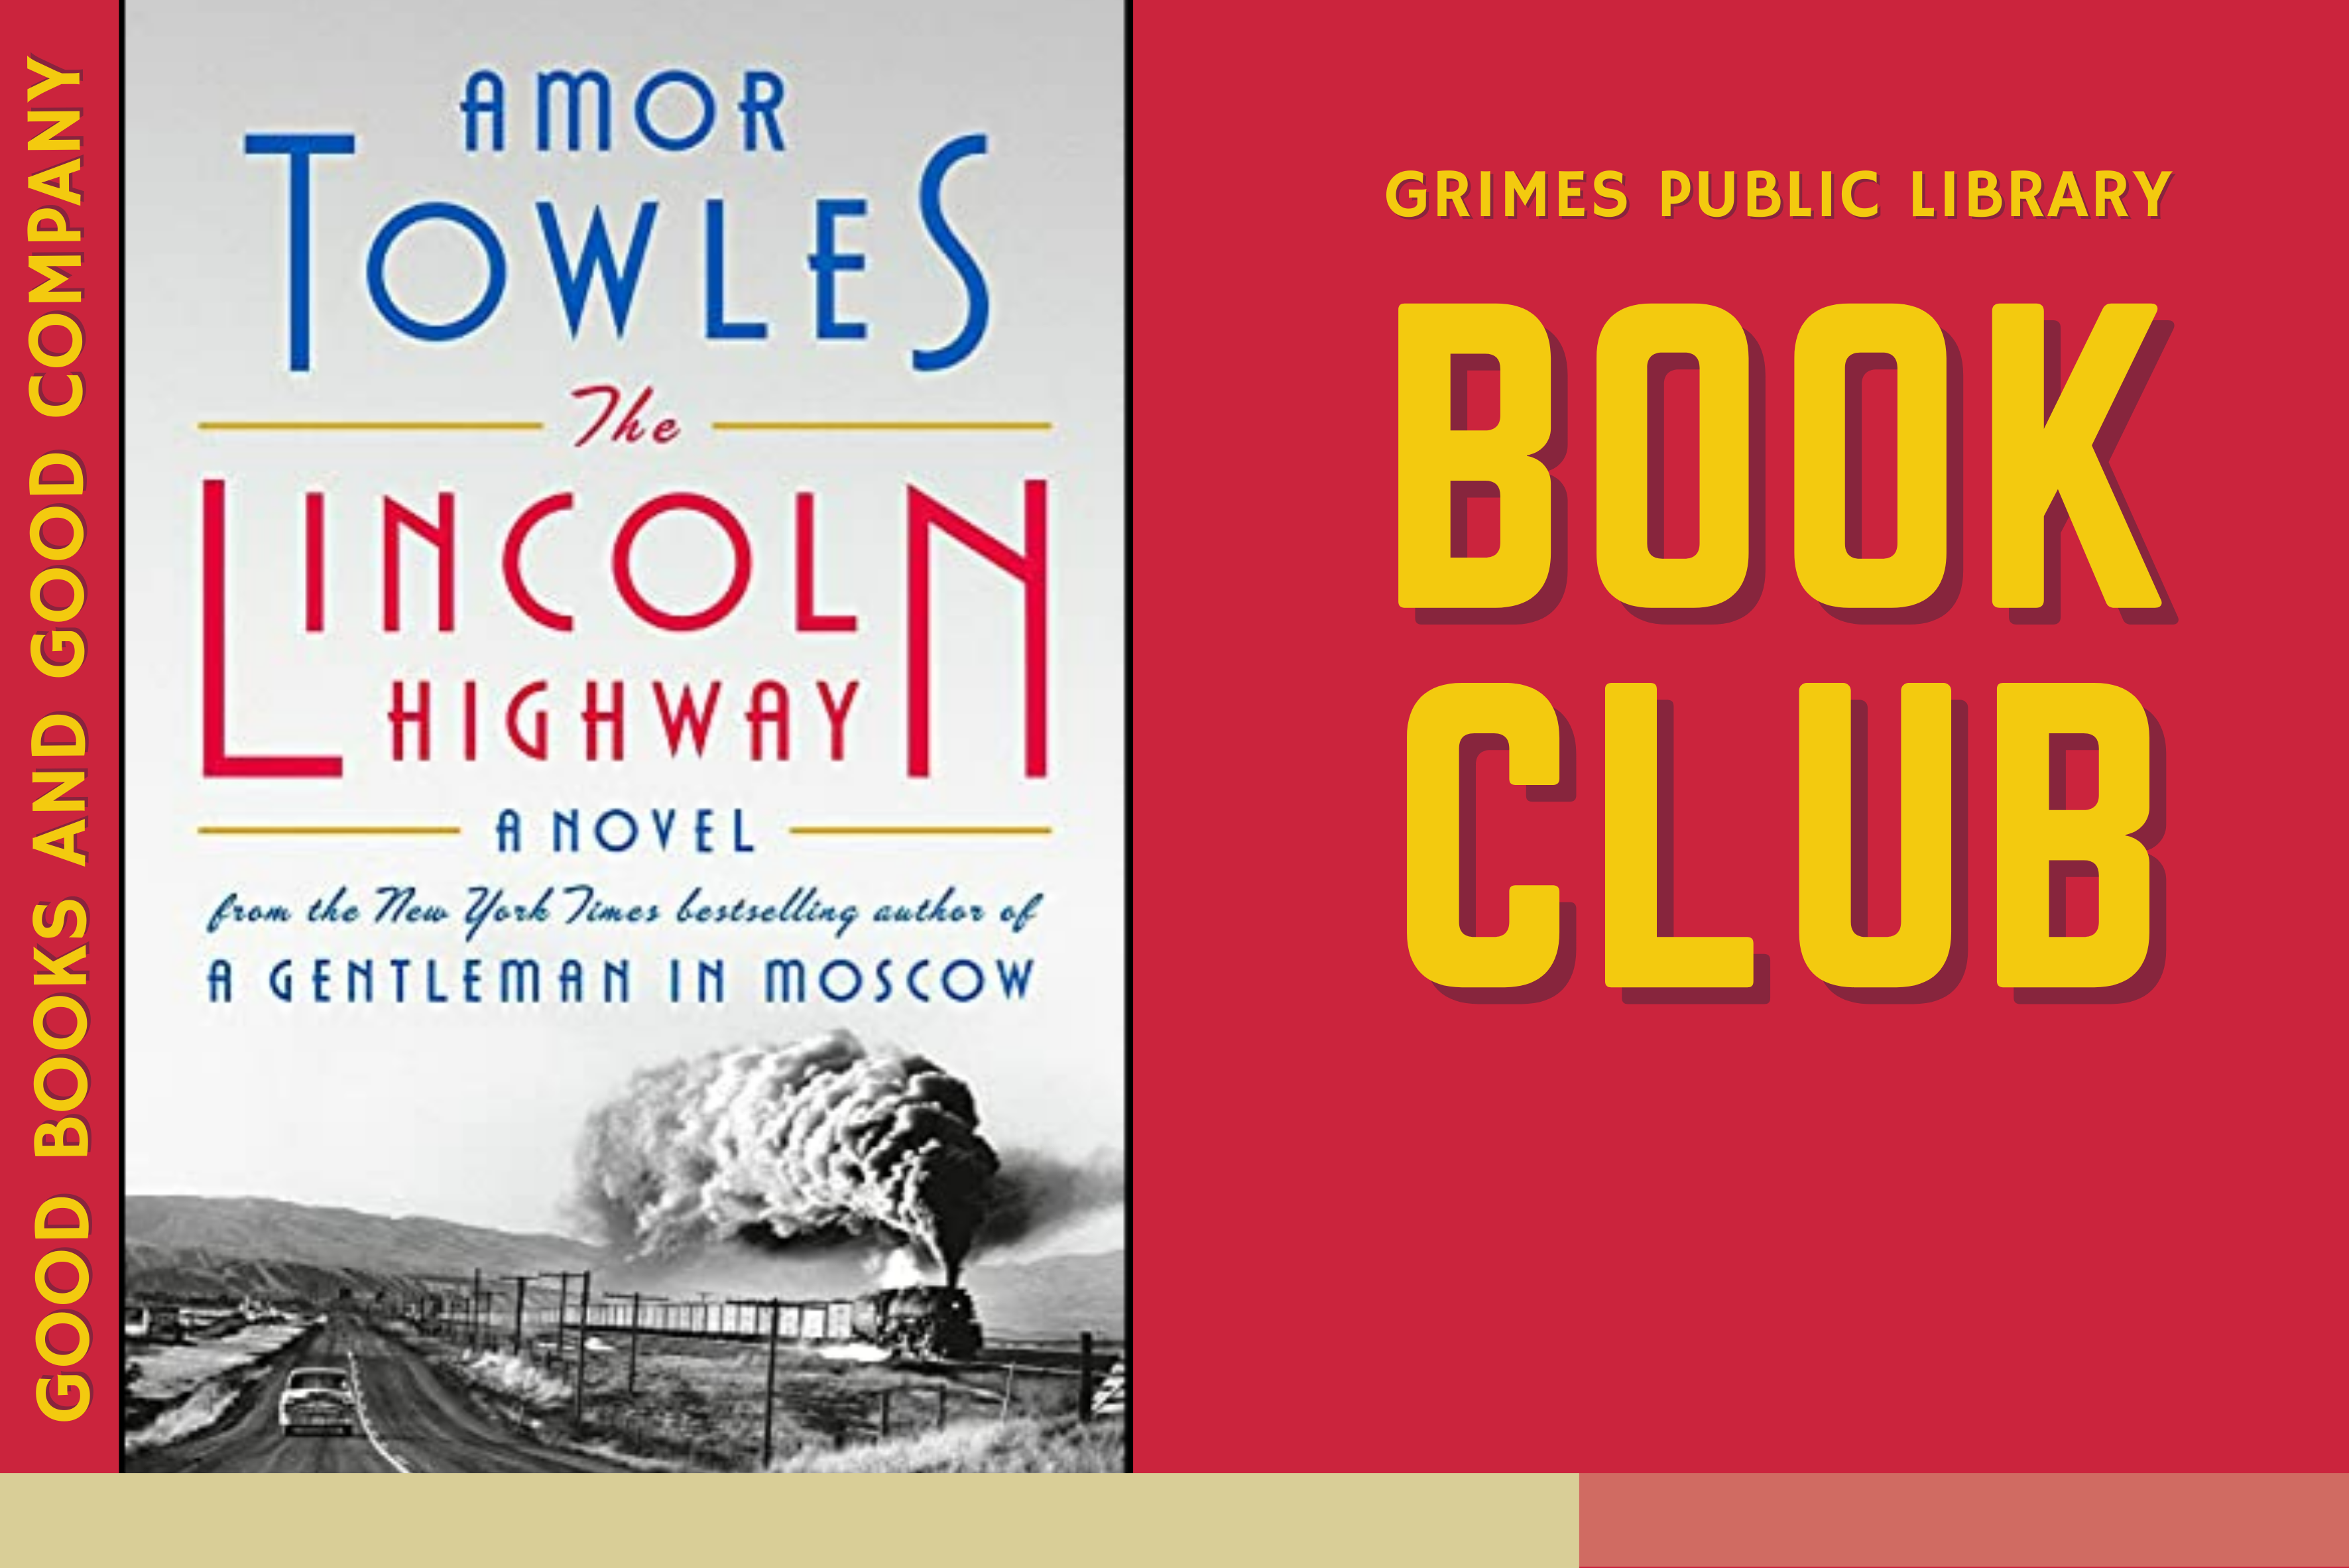 A picture of the cover of The Lincoln Highway by Amor Towles